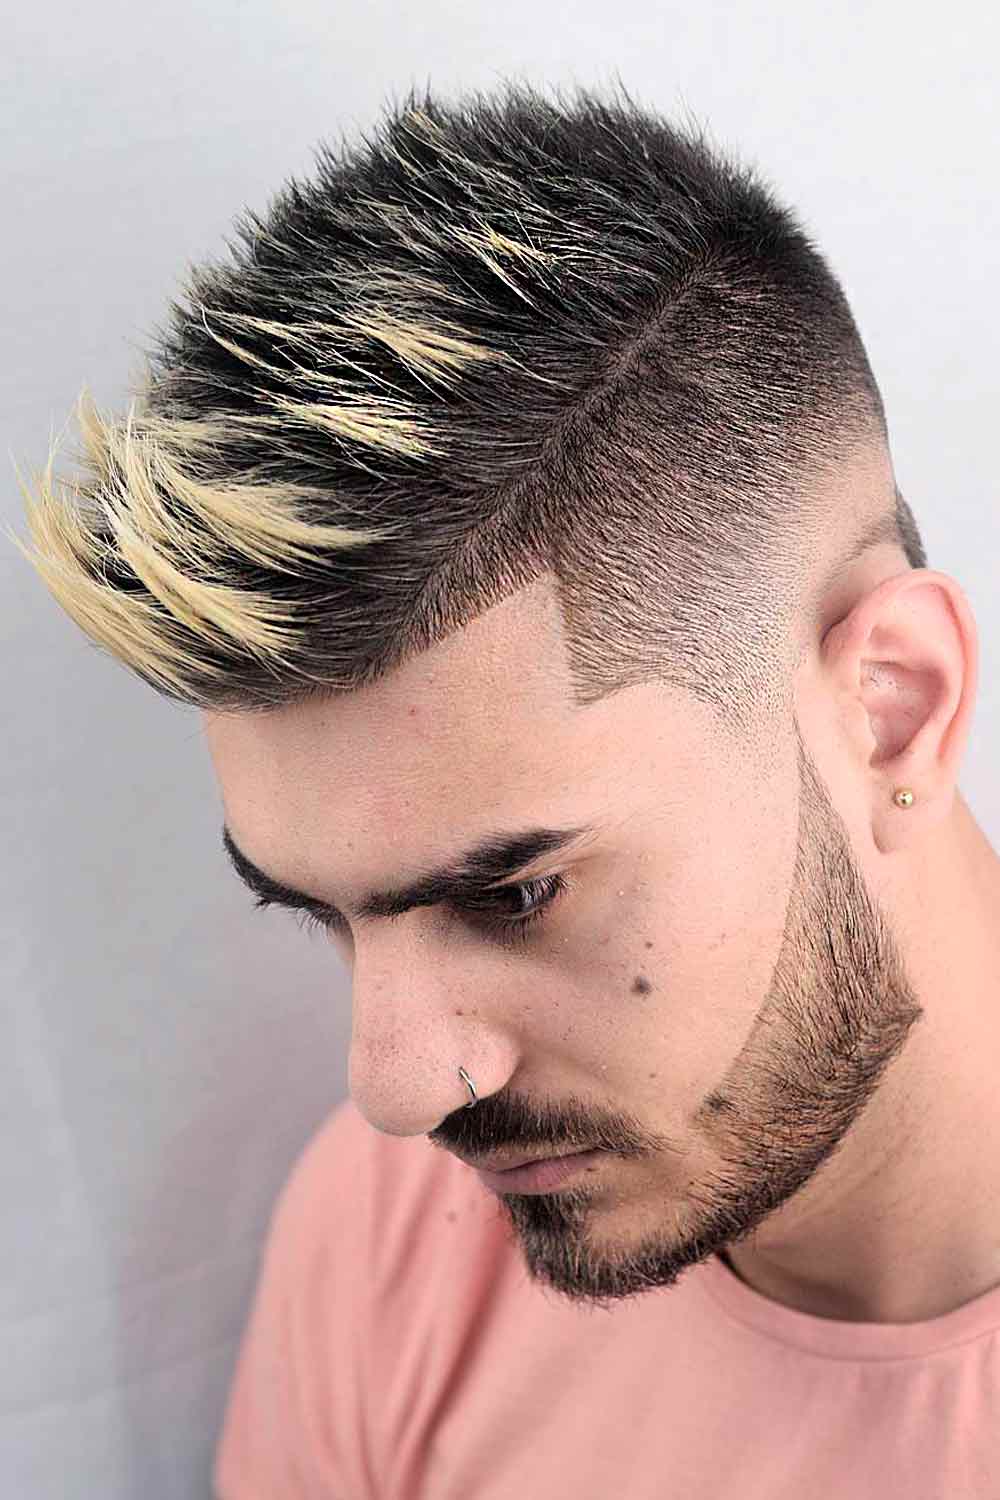 Hair Color for Men: 35 Examples Ranging from Vivids to Natural Hues